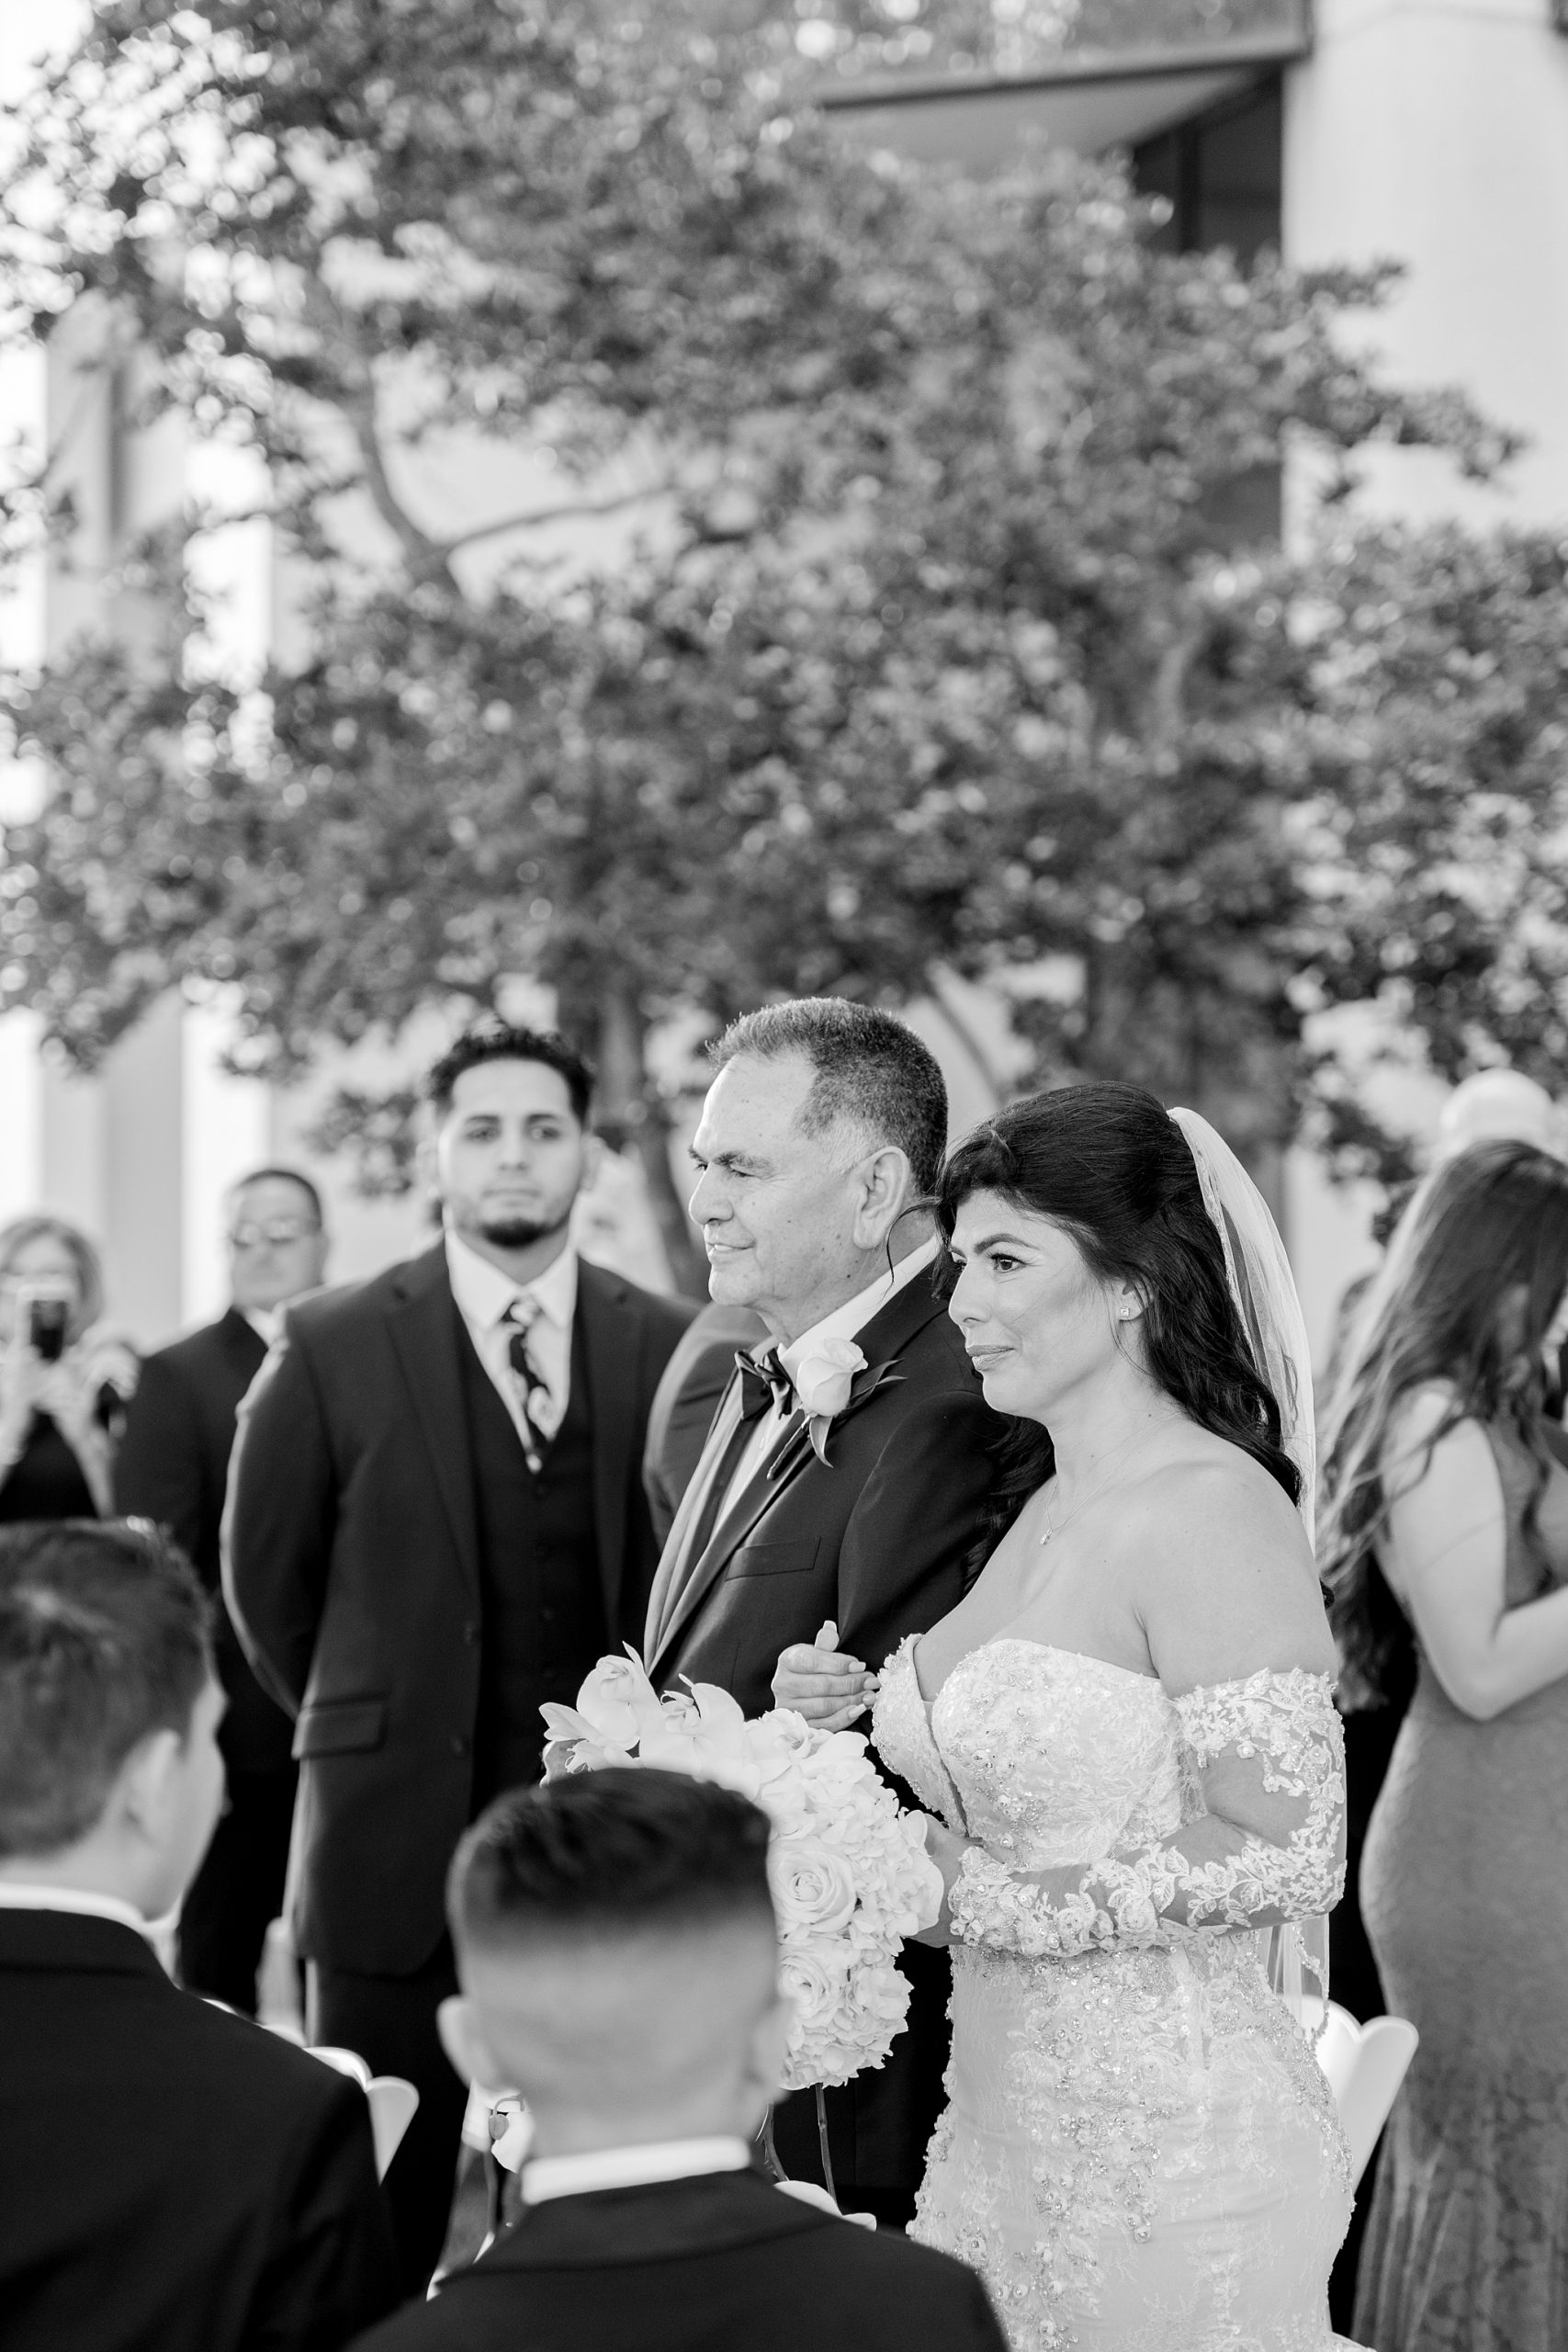 Bride walking down the aisle with dad | Orlando wedding photographer